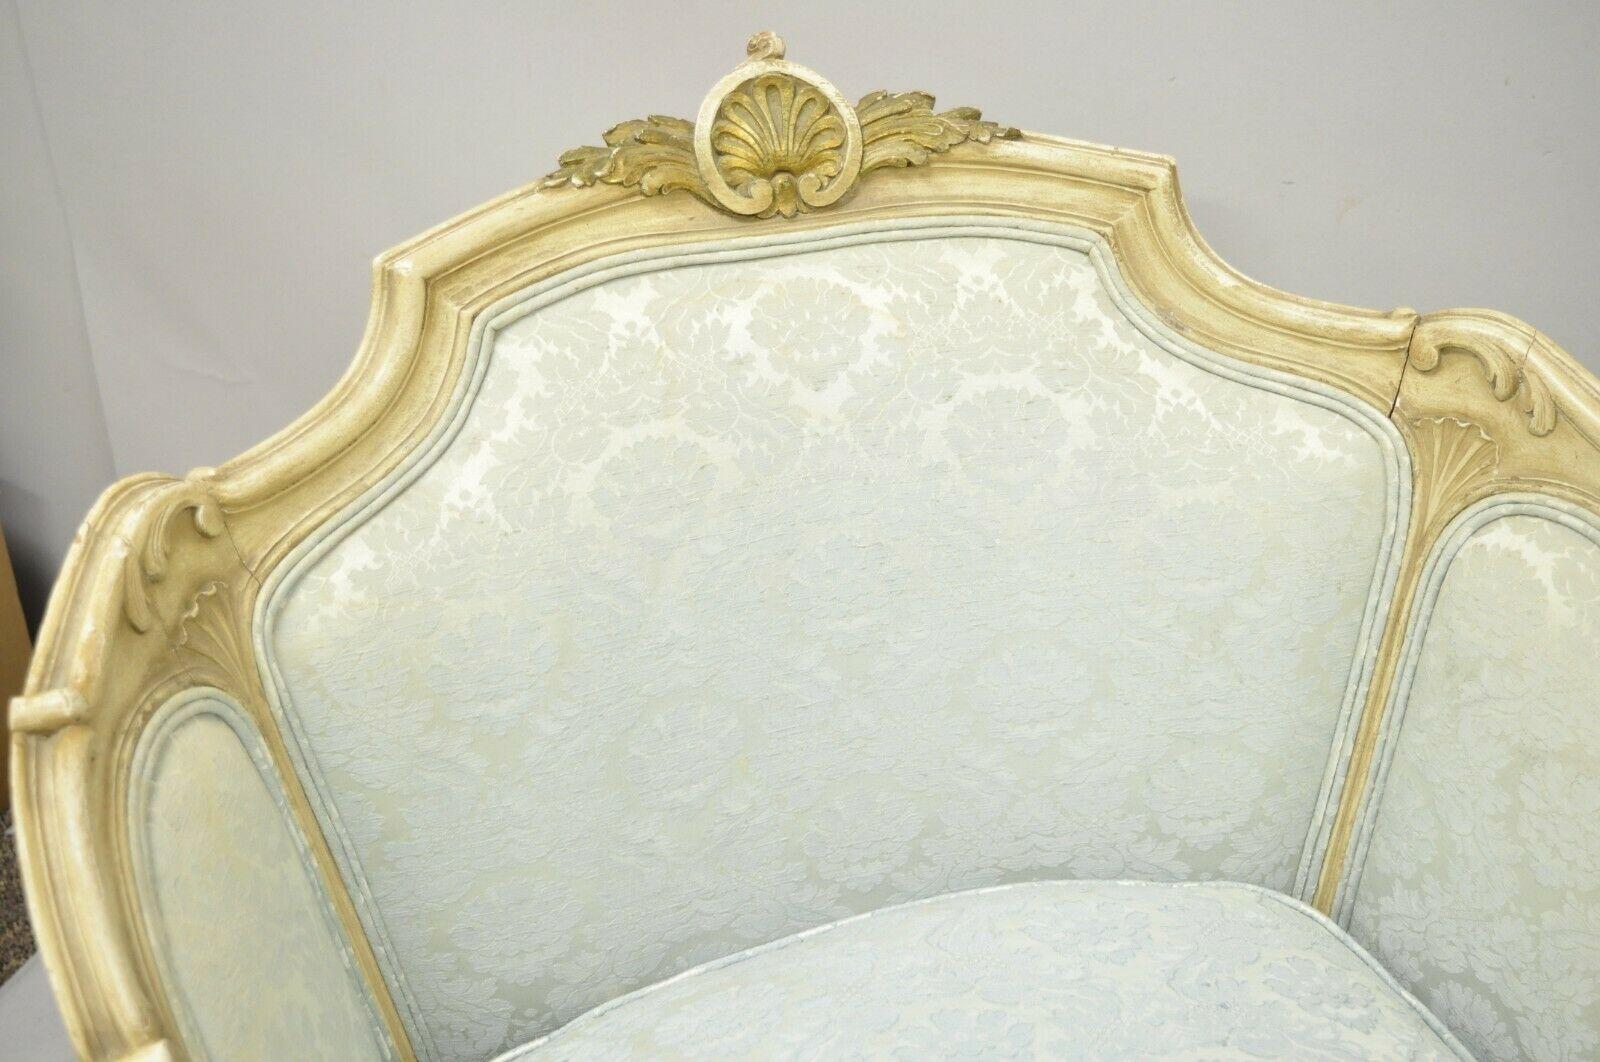 Antique French Louis XV style cream distress painted Recamier chaise lounge sofa. Item features cream distress painted finish, down cushion, solid wood frame, finely carved details, cabriole legs, very nice antique item, great style and form, circa